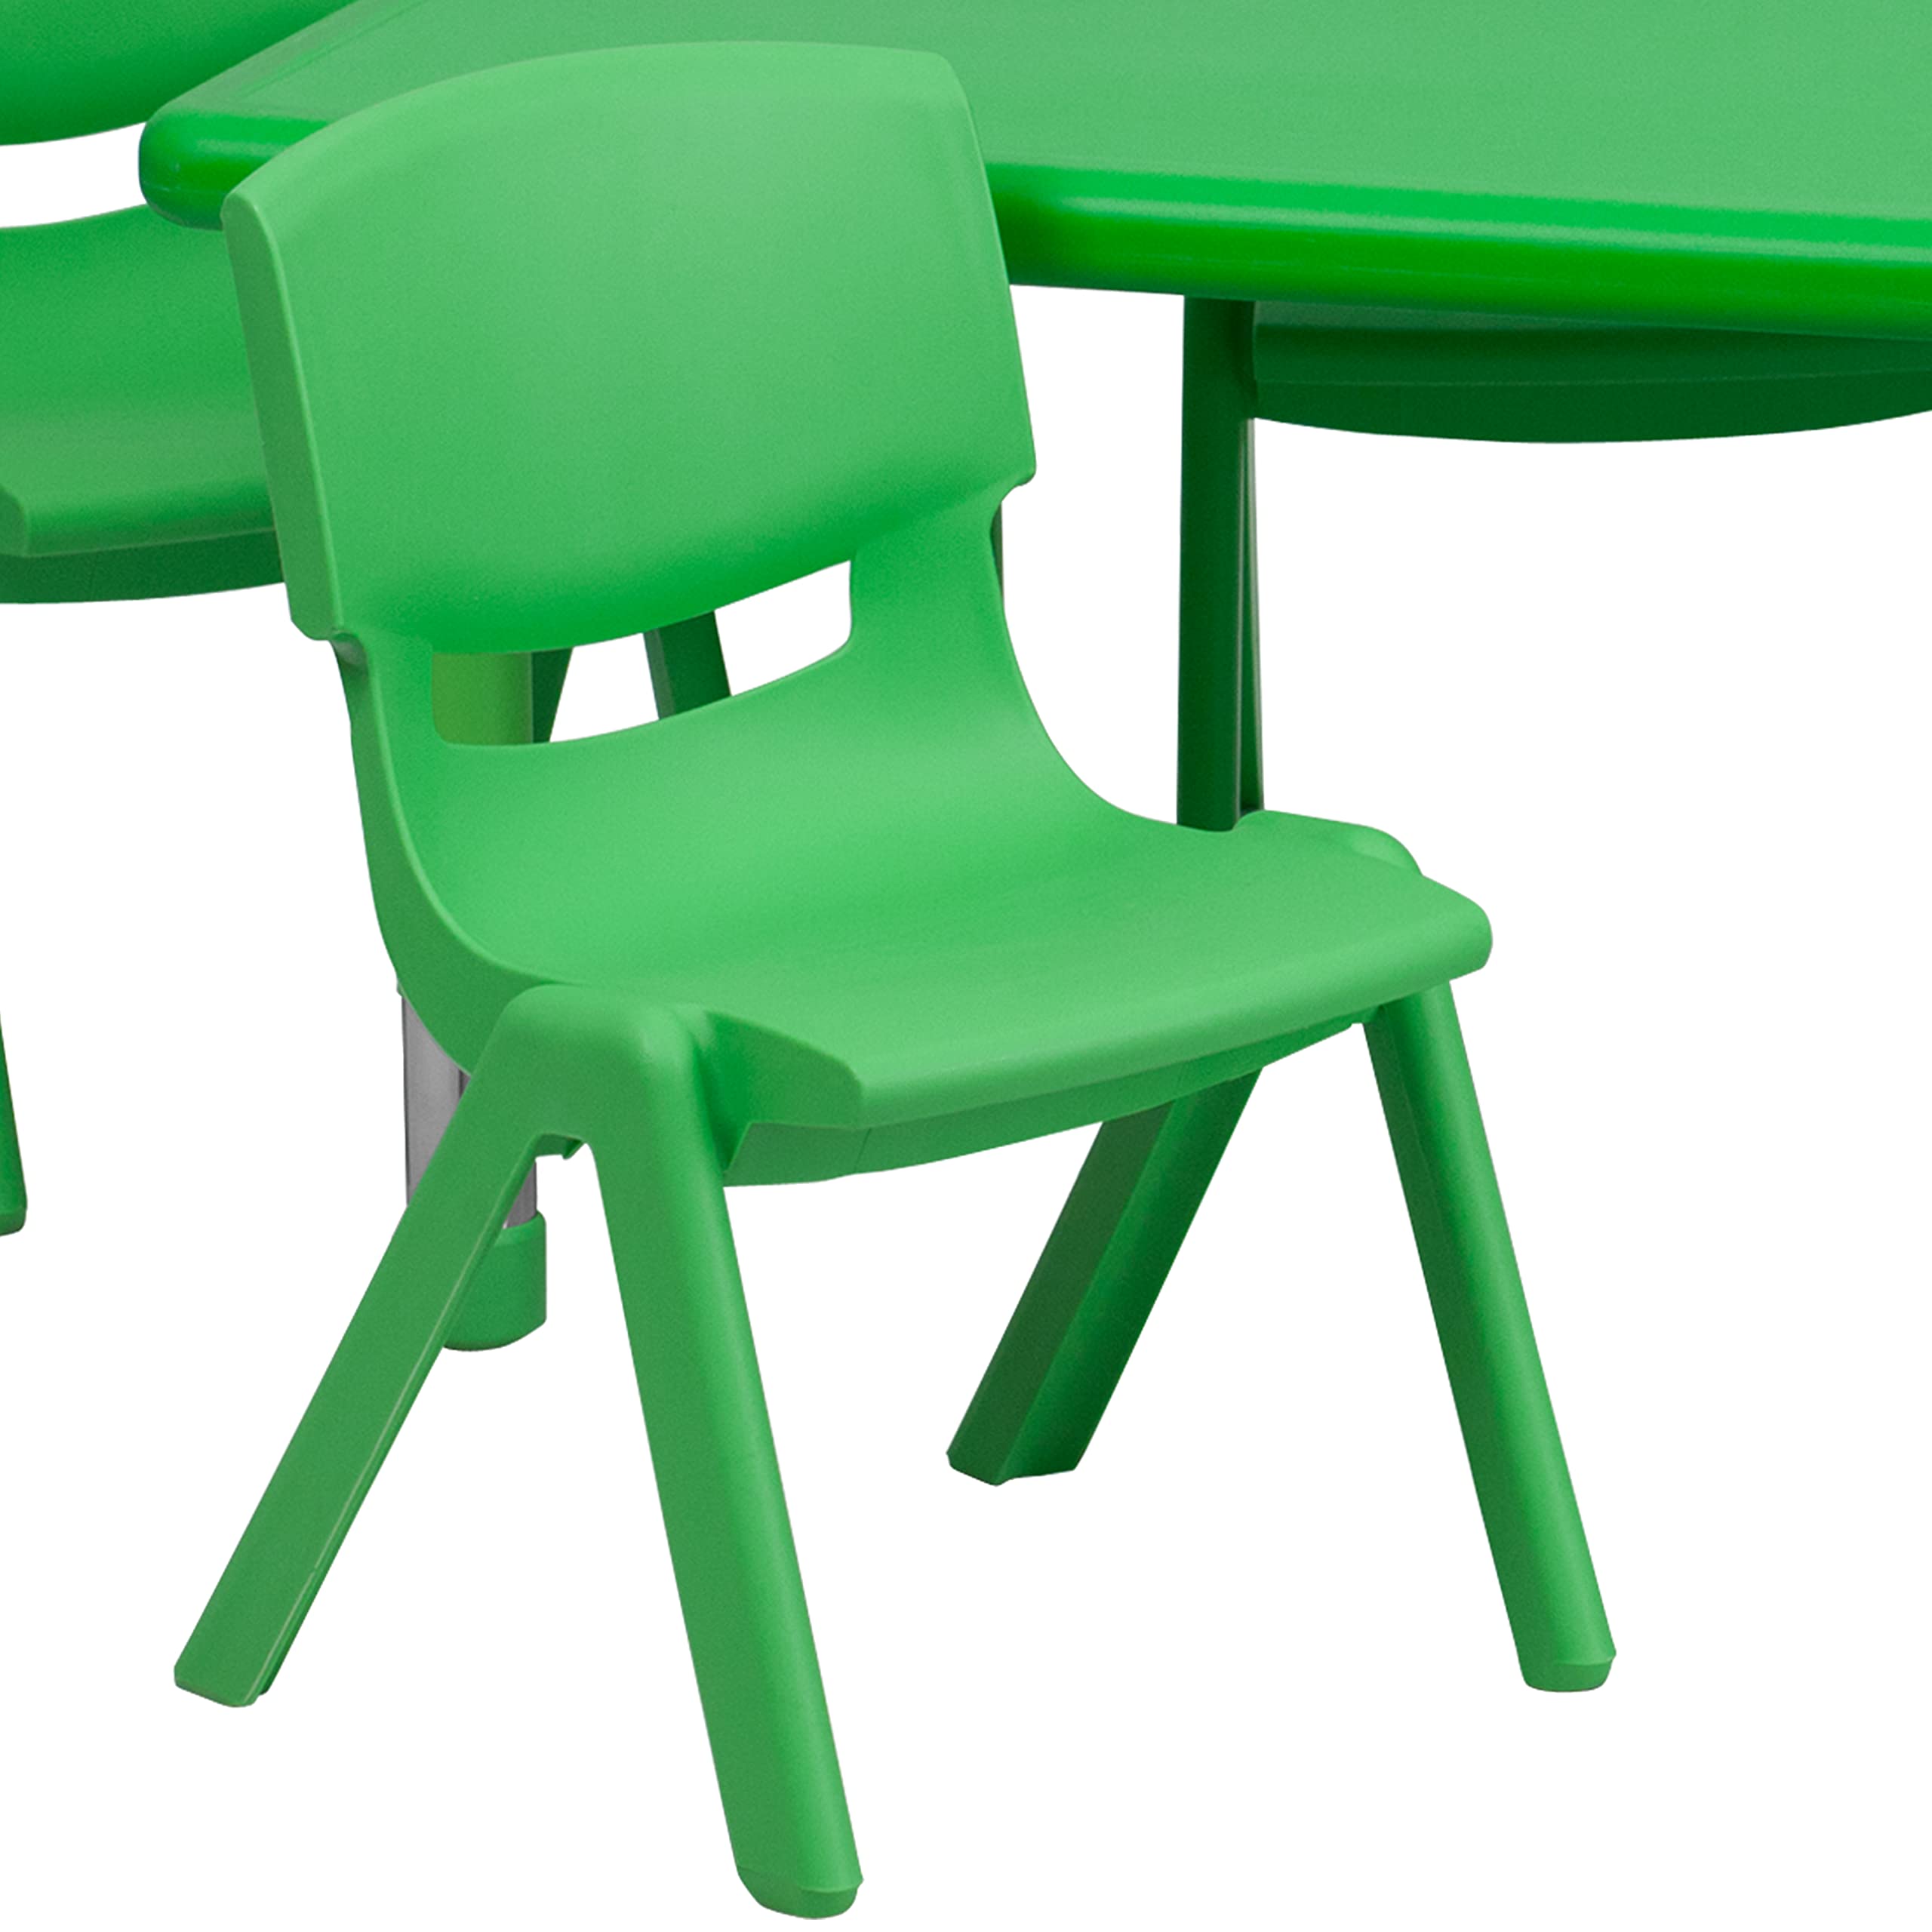 Flash Furniture 24''W x 48''L Rectangular Green Plastic Height Adjustable Activity Table Set with 6 Chairs